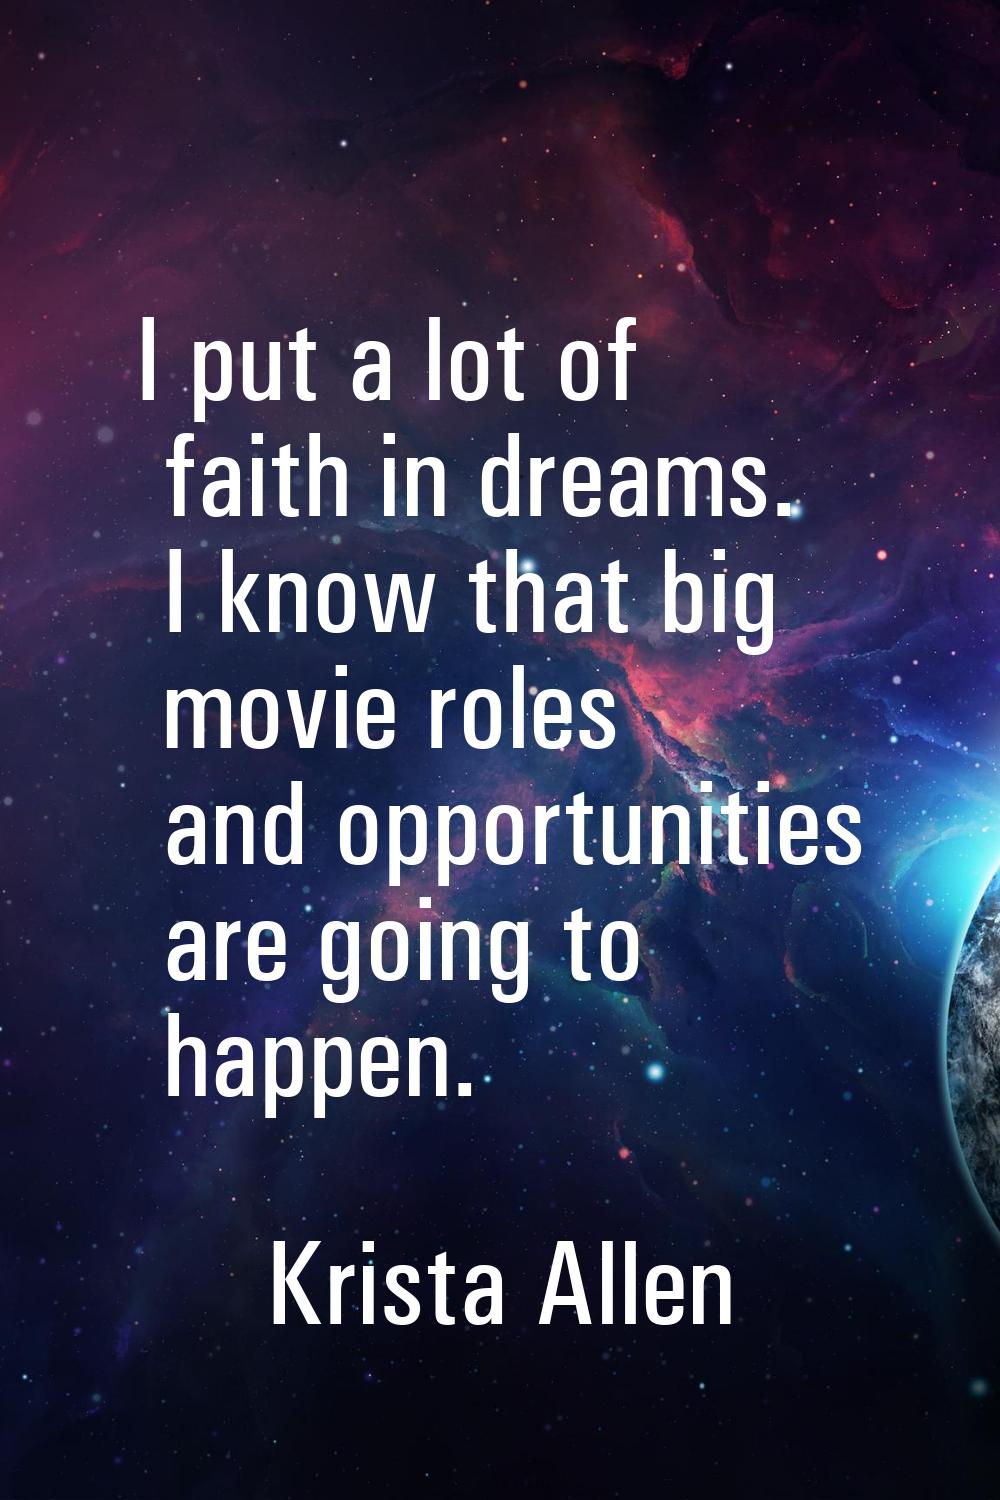 I put a lot of faith in dreams. I know that big movie roles and opportunities are going to happen.